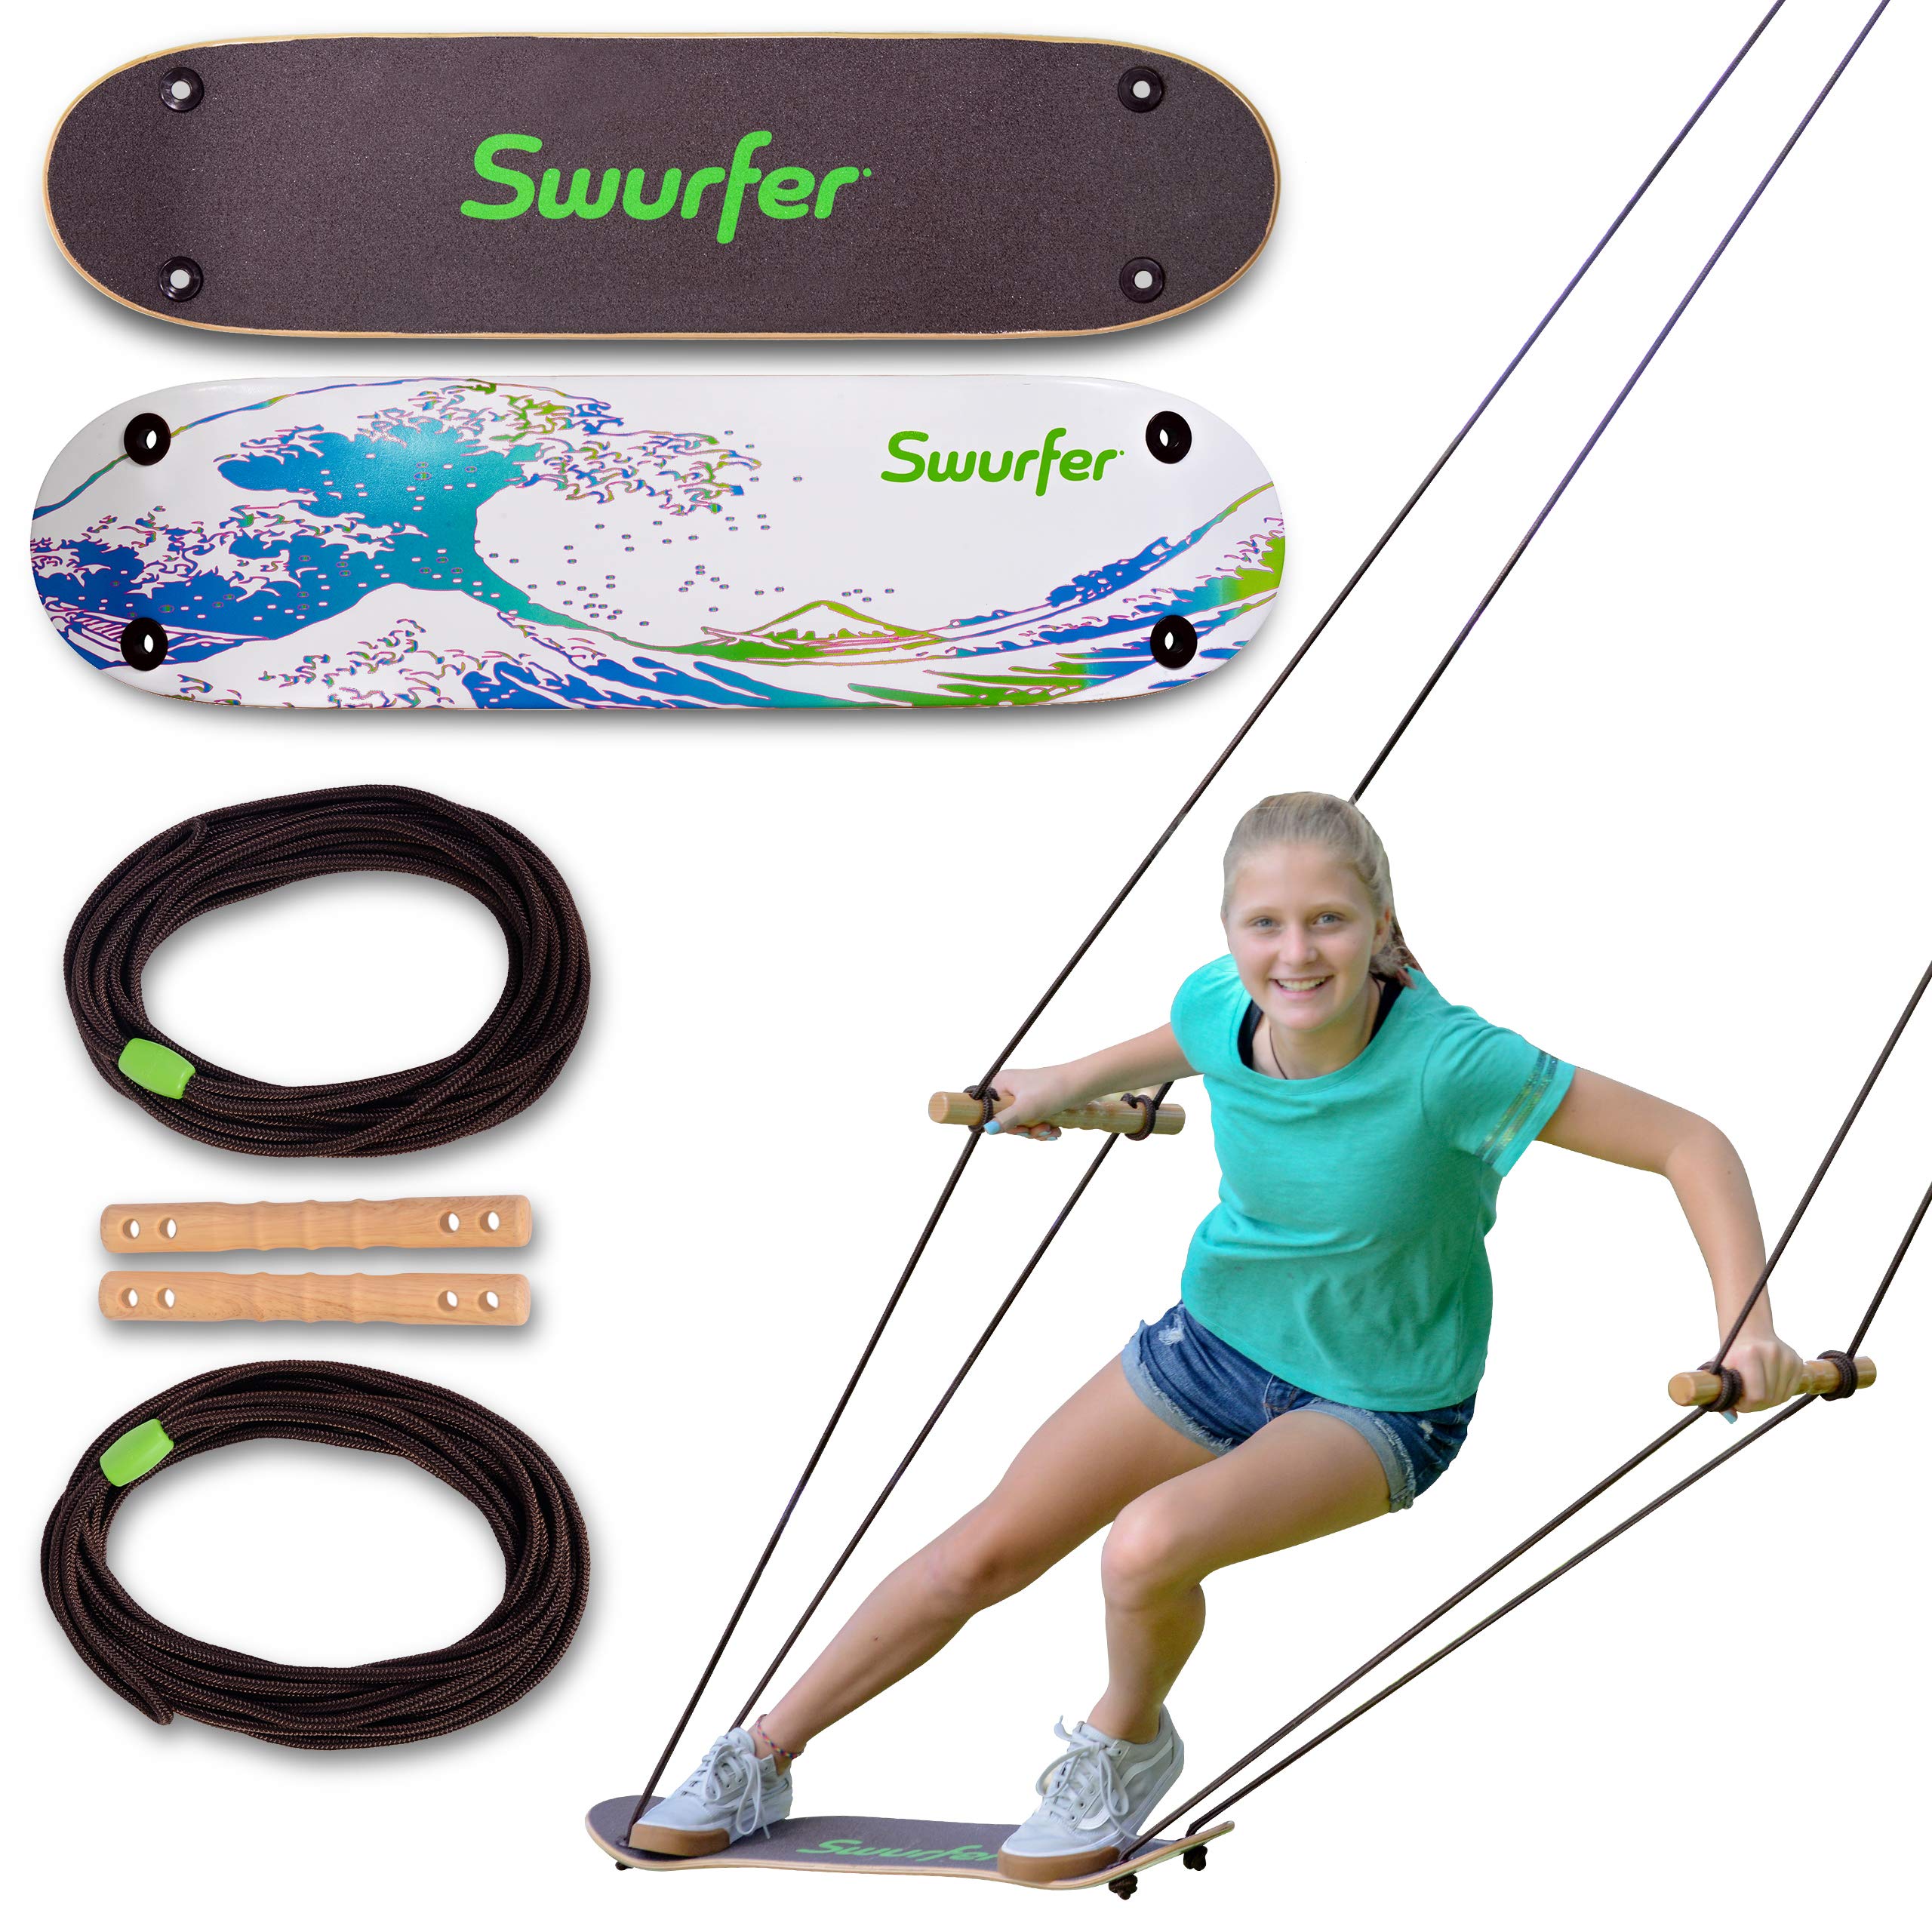 Swurfer TreeSkate Skateboard Swing, Outdoor Stand Up Surf Swing, Holds Up to 200 lbs, Ages 6 and Up, Adjustable Handles, Grip Tape, Kids Outdoor Play Equipment for Children and Adults (Waves)